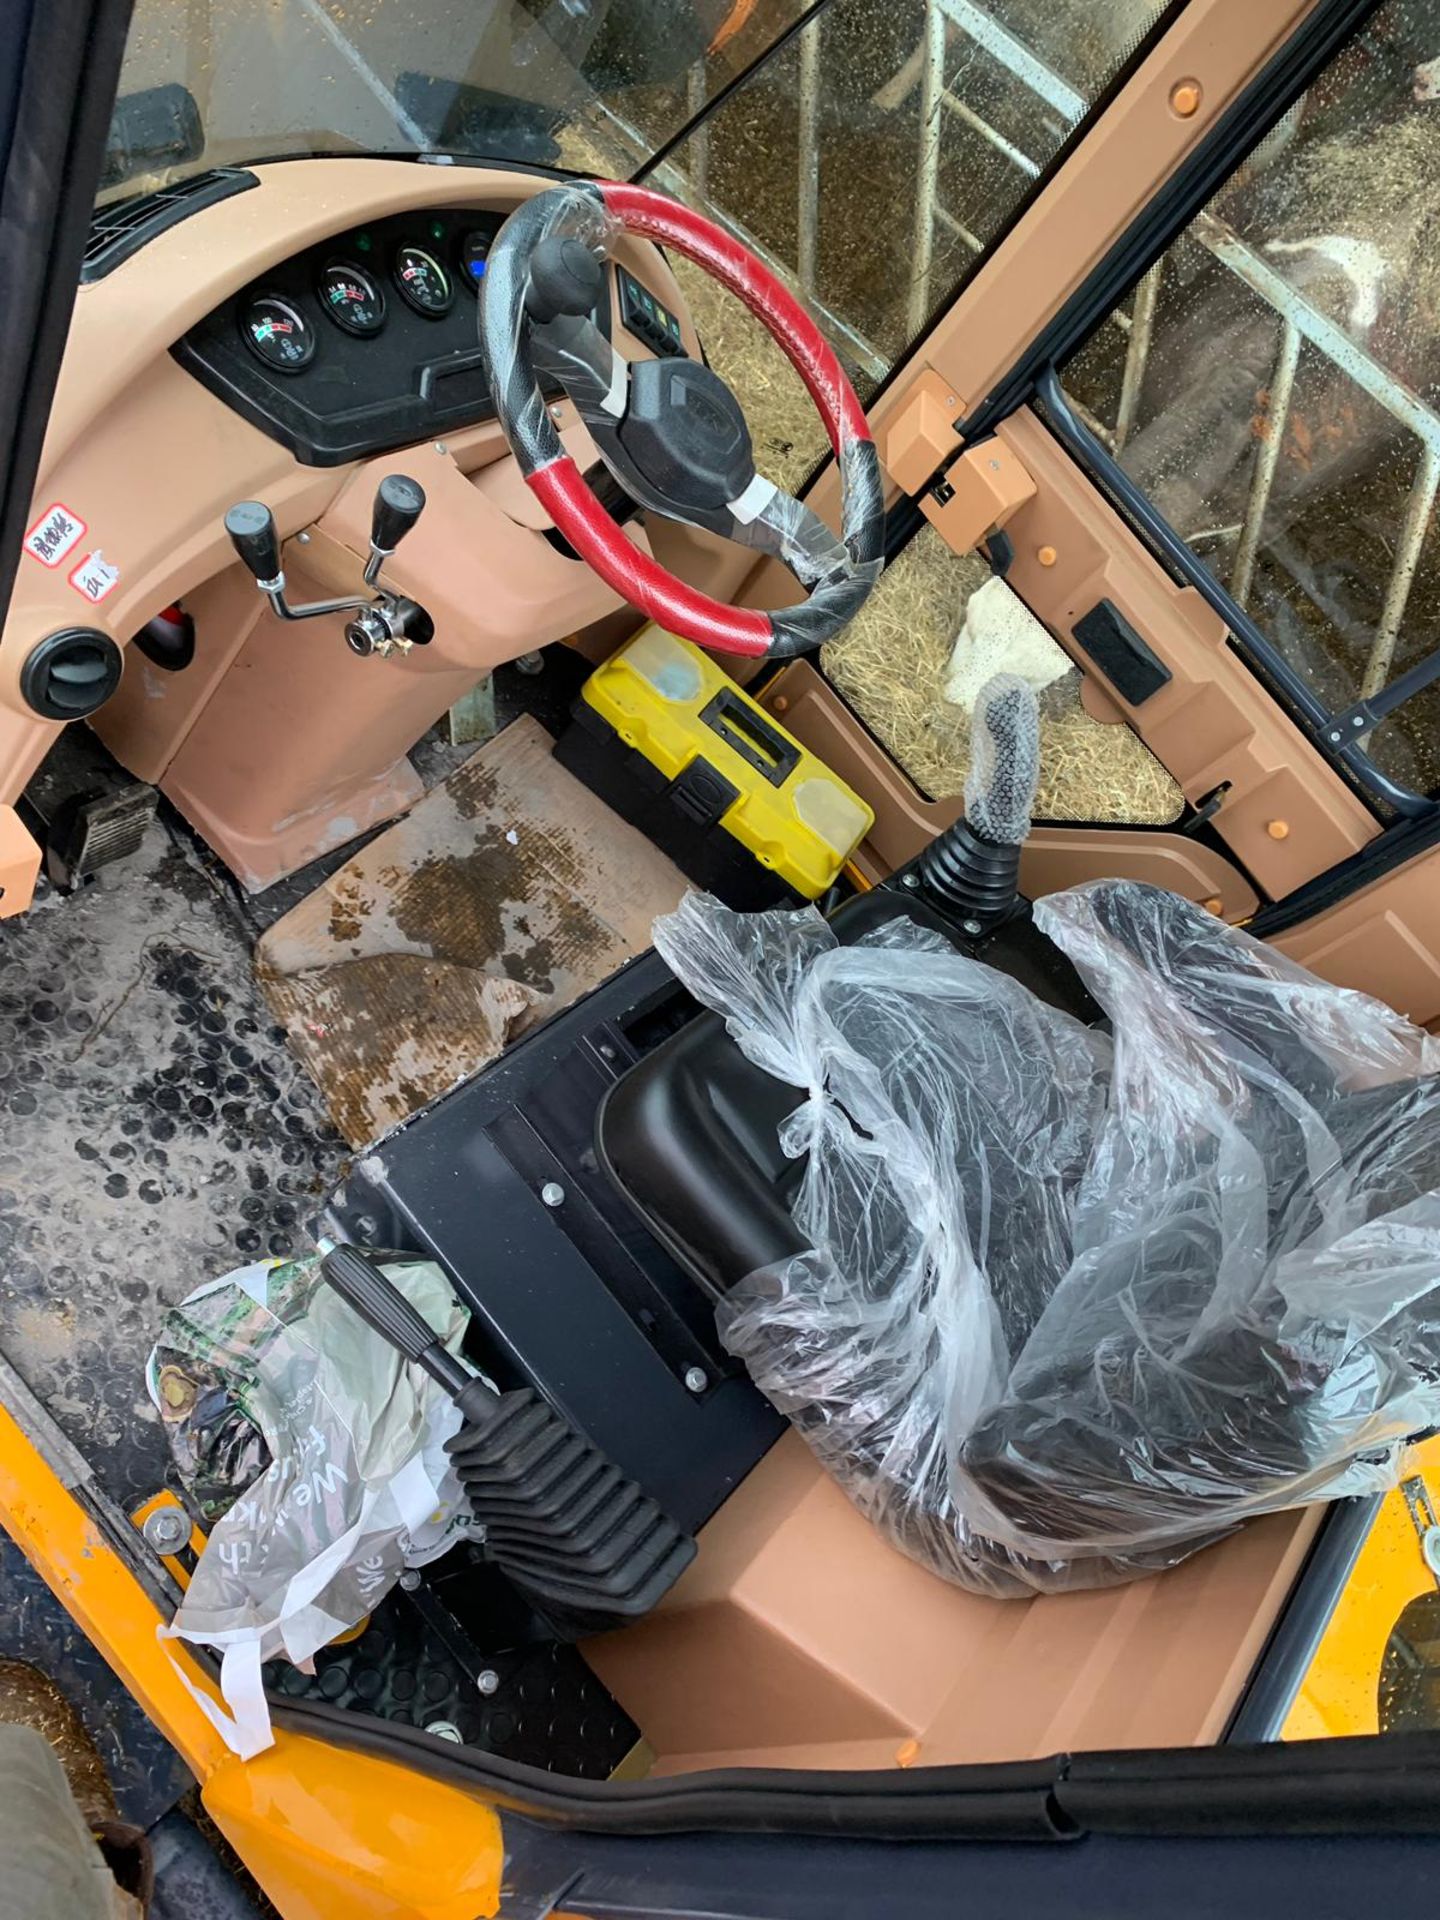 2019 BRAND NEW AND UNUSED ATTACK ZL15 WHEEL LOADER, RUNS WORKS AND LIFTS *PLUS VAT* - Image 11 of 11